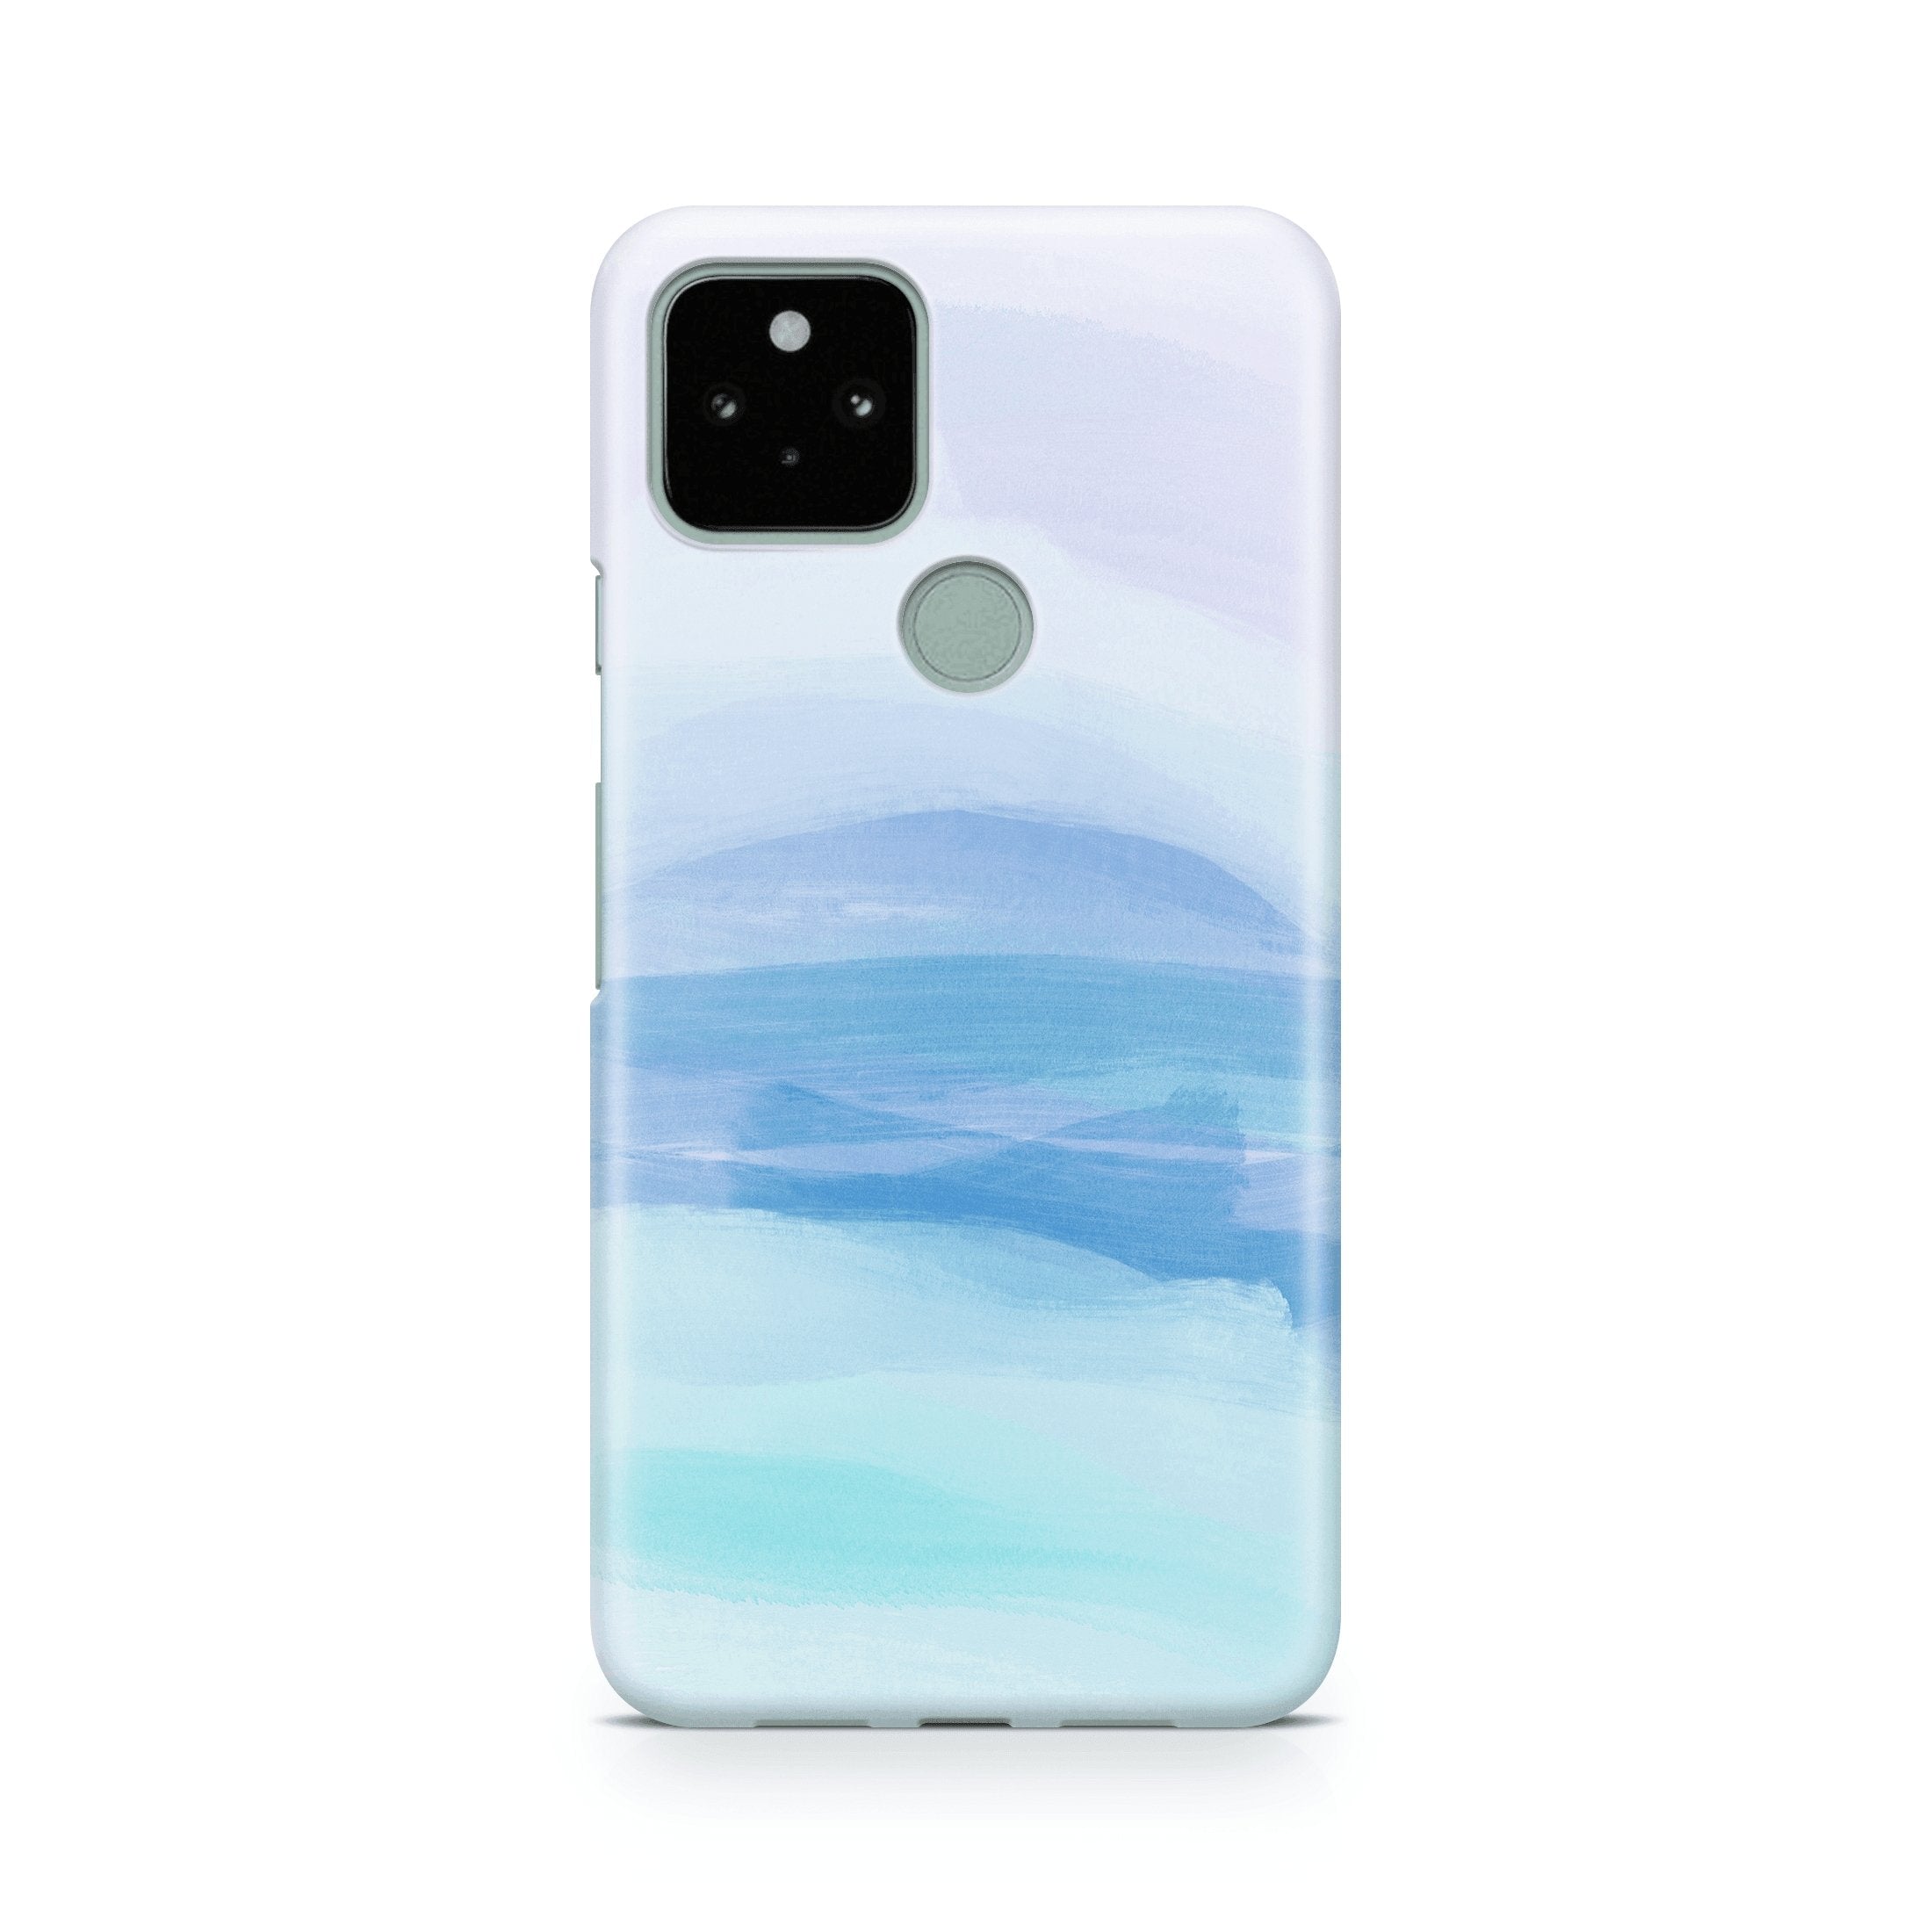 Fading Blue Ombre - Google phone case designs by CaseSwagger